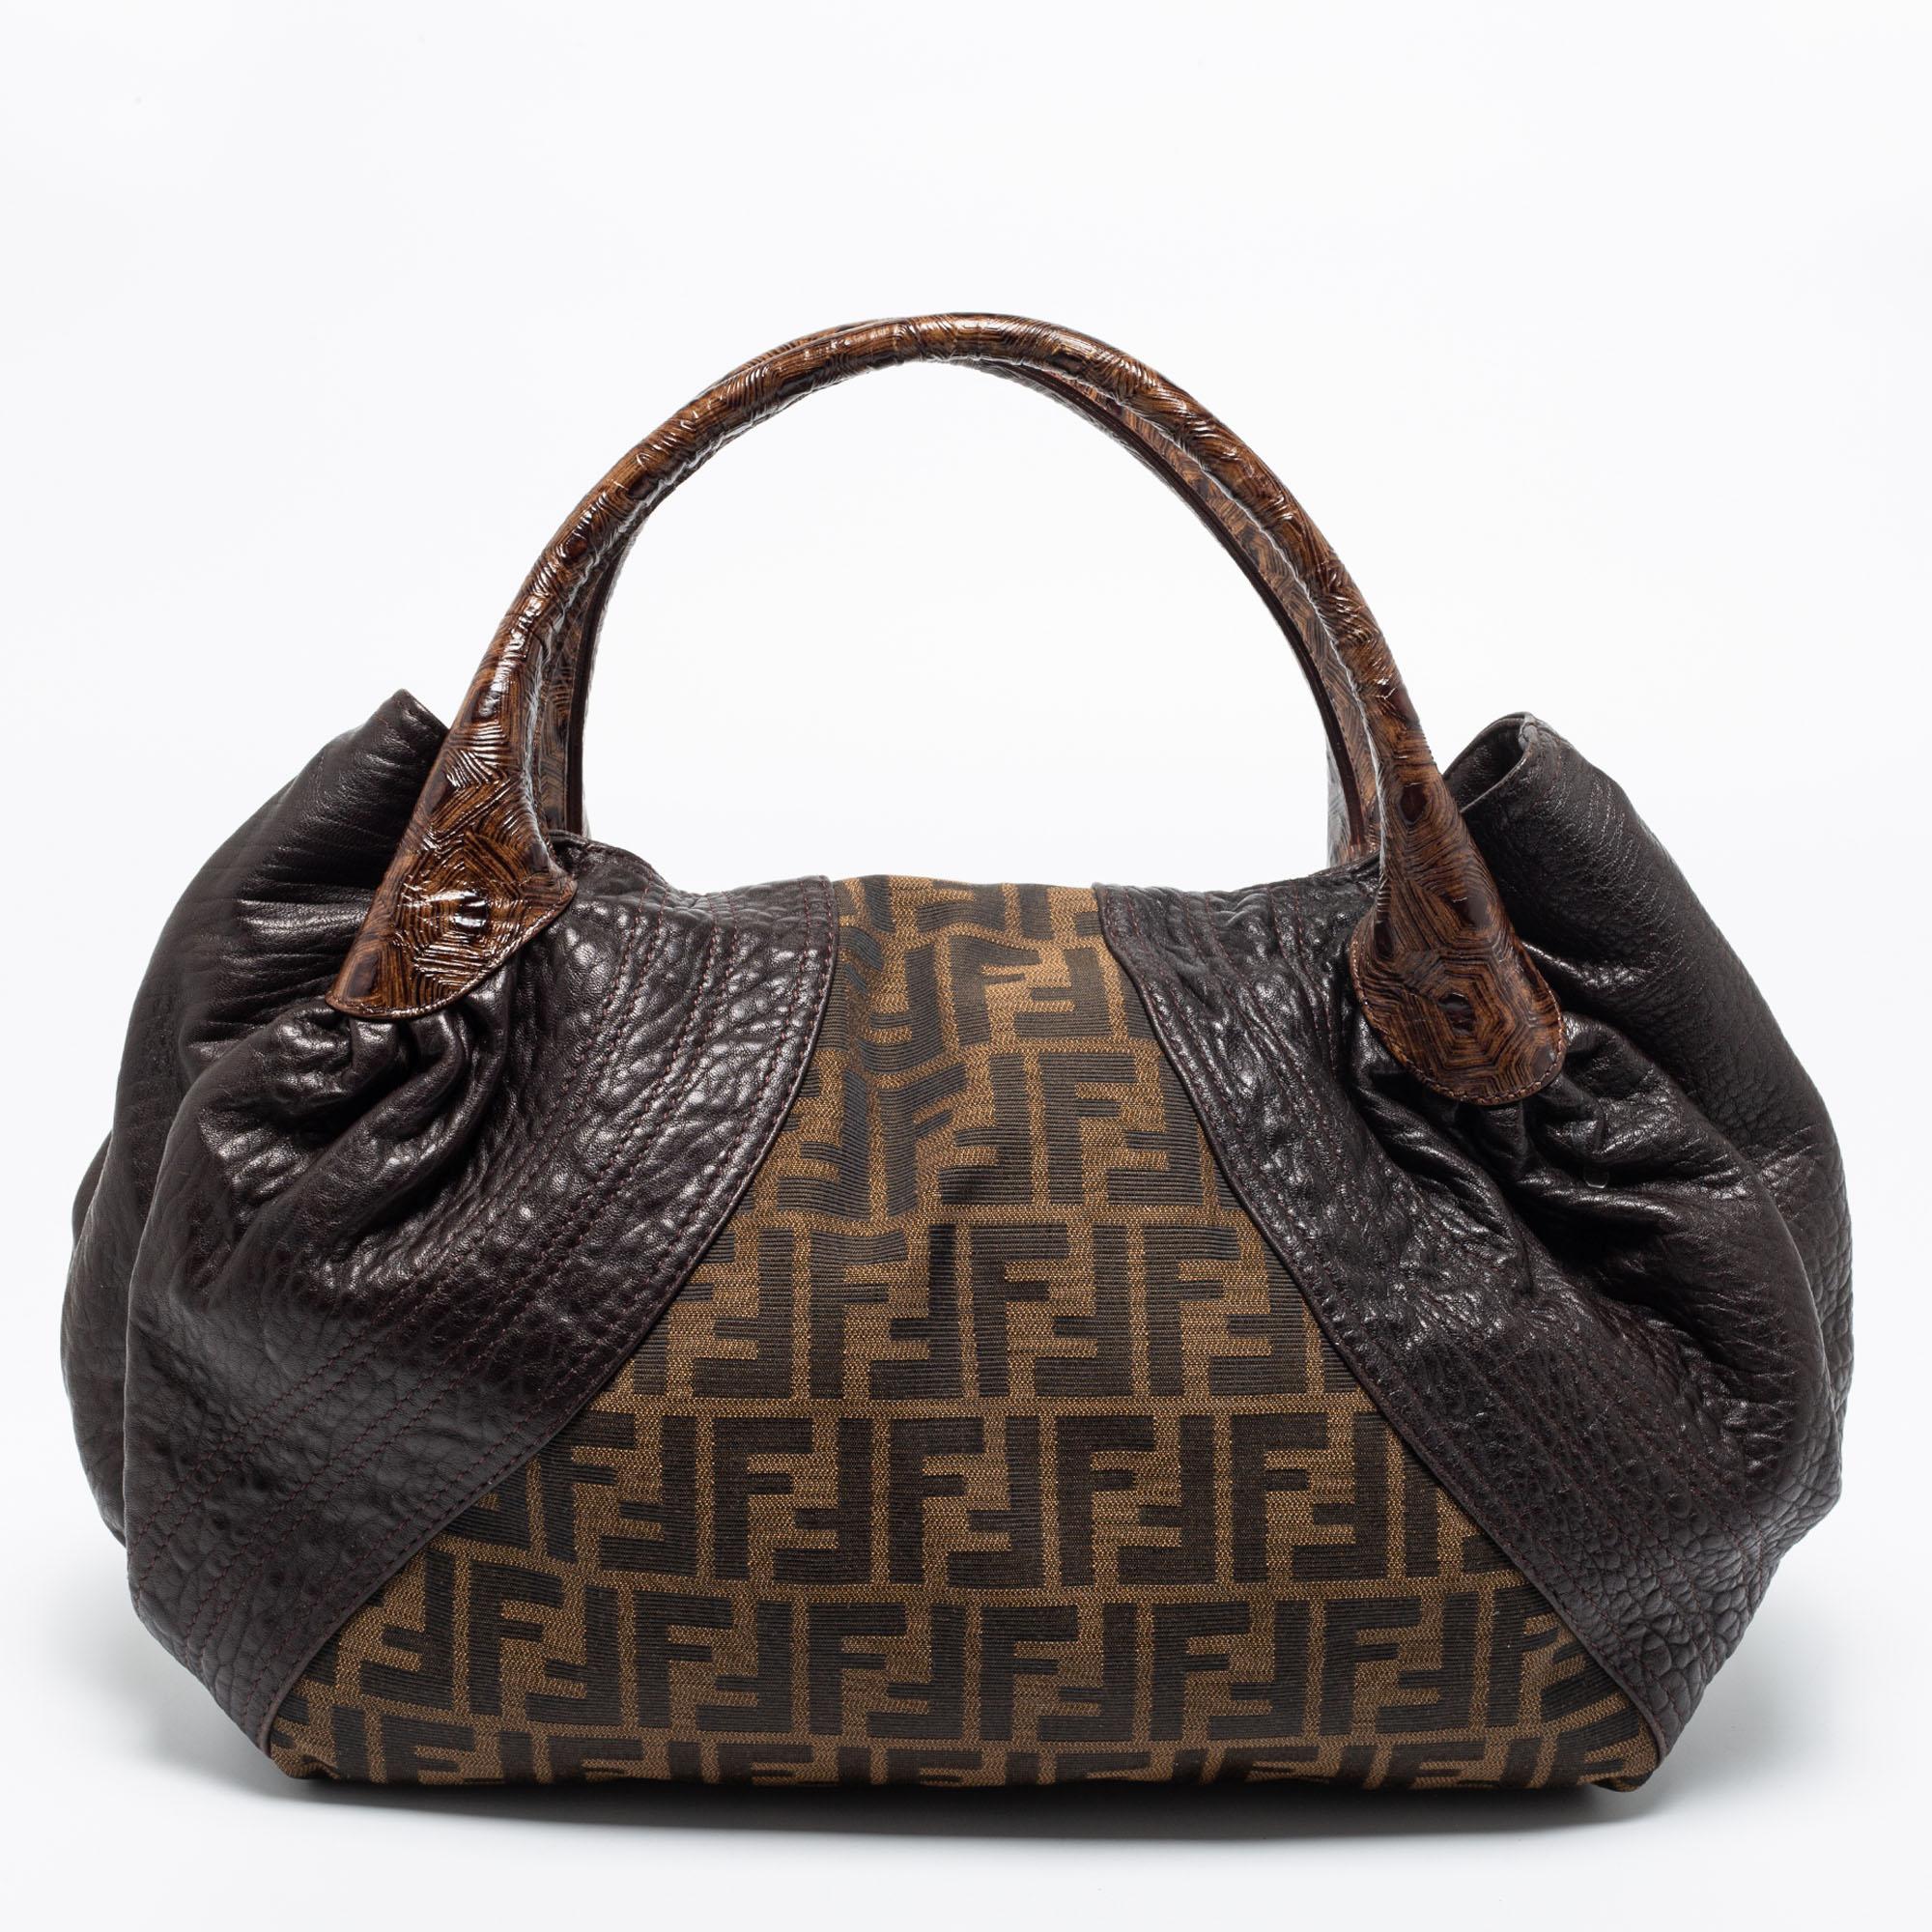 This Fendi Spy bag promises to take you through the day with ease, whether you're at work or out and about in the city. From its design to its structure, the Zucca canvas & leather bag promises charm and durability. It flaunts two woven handles and